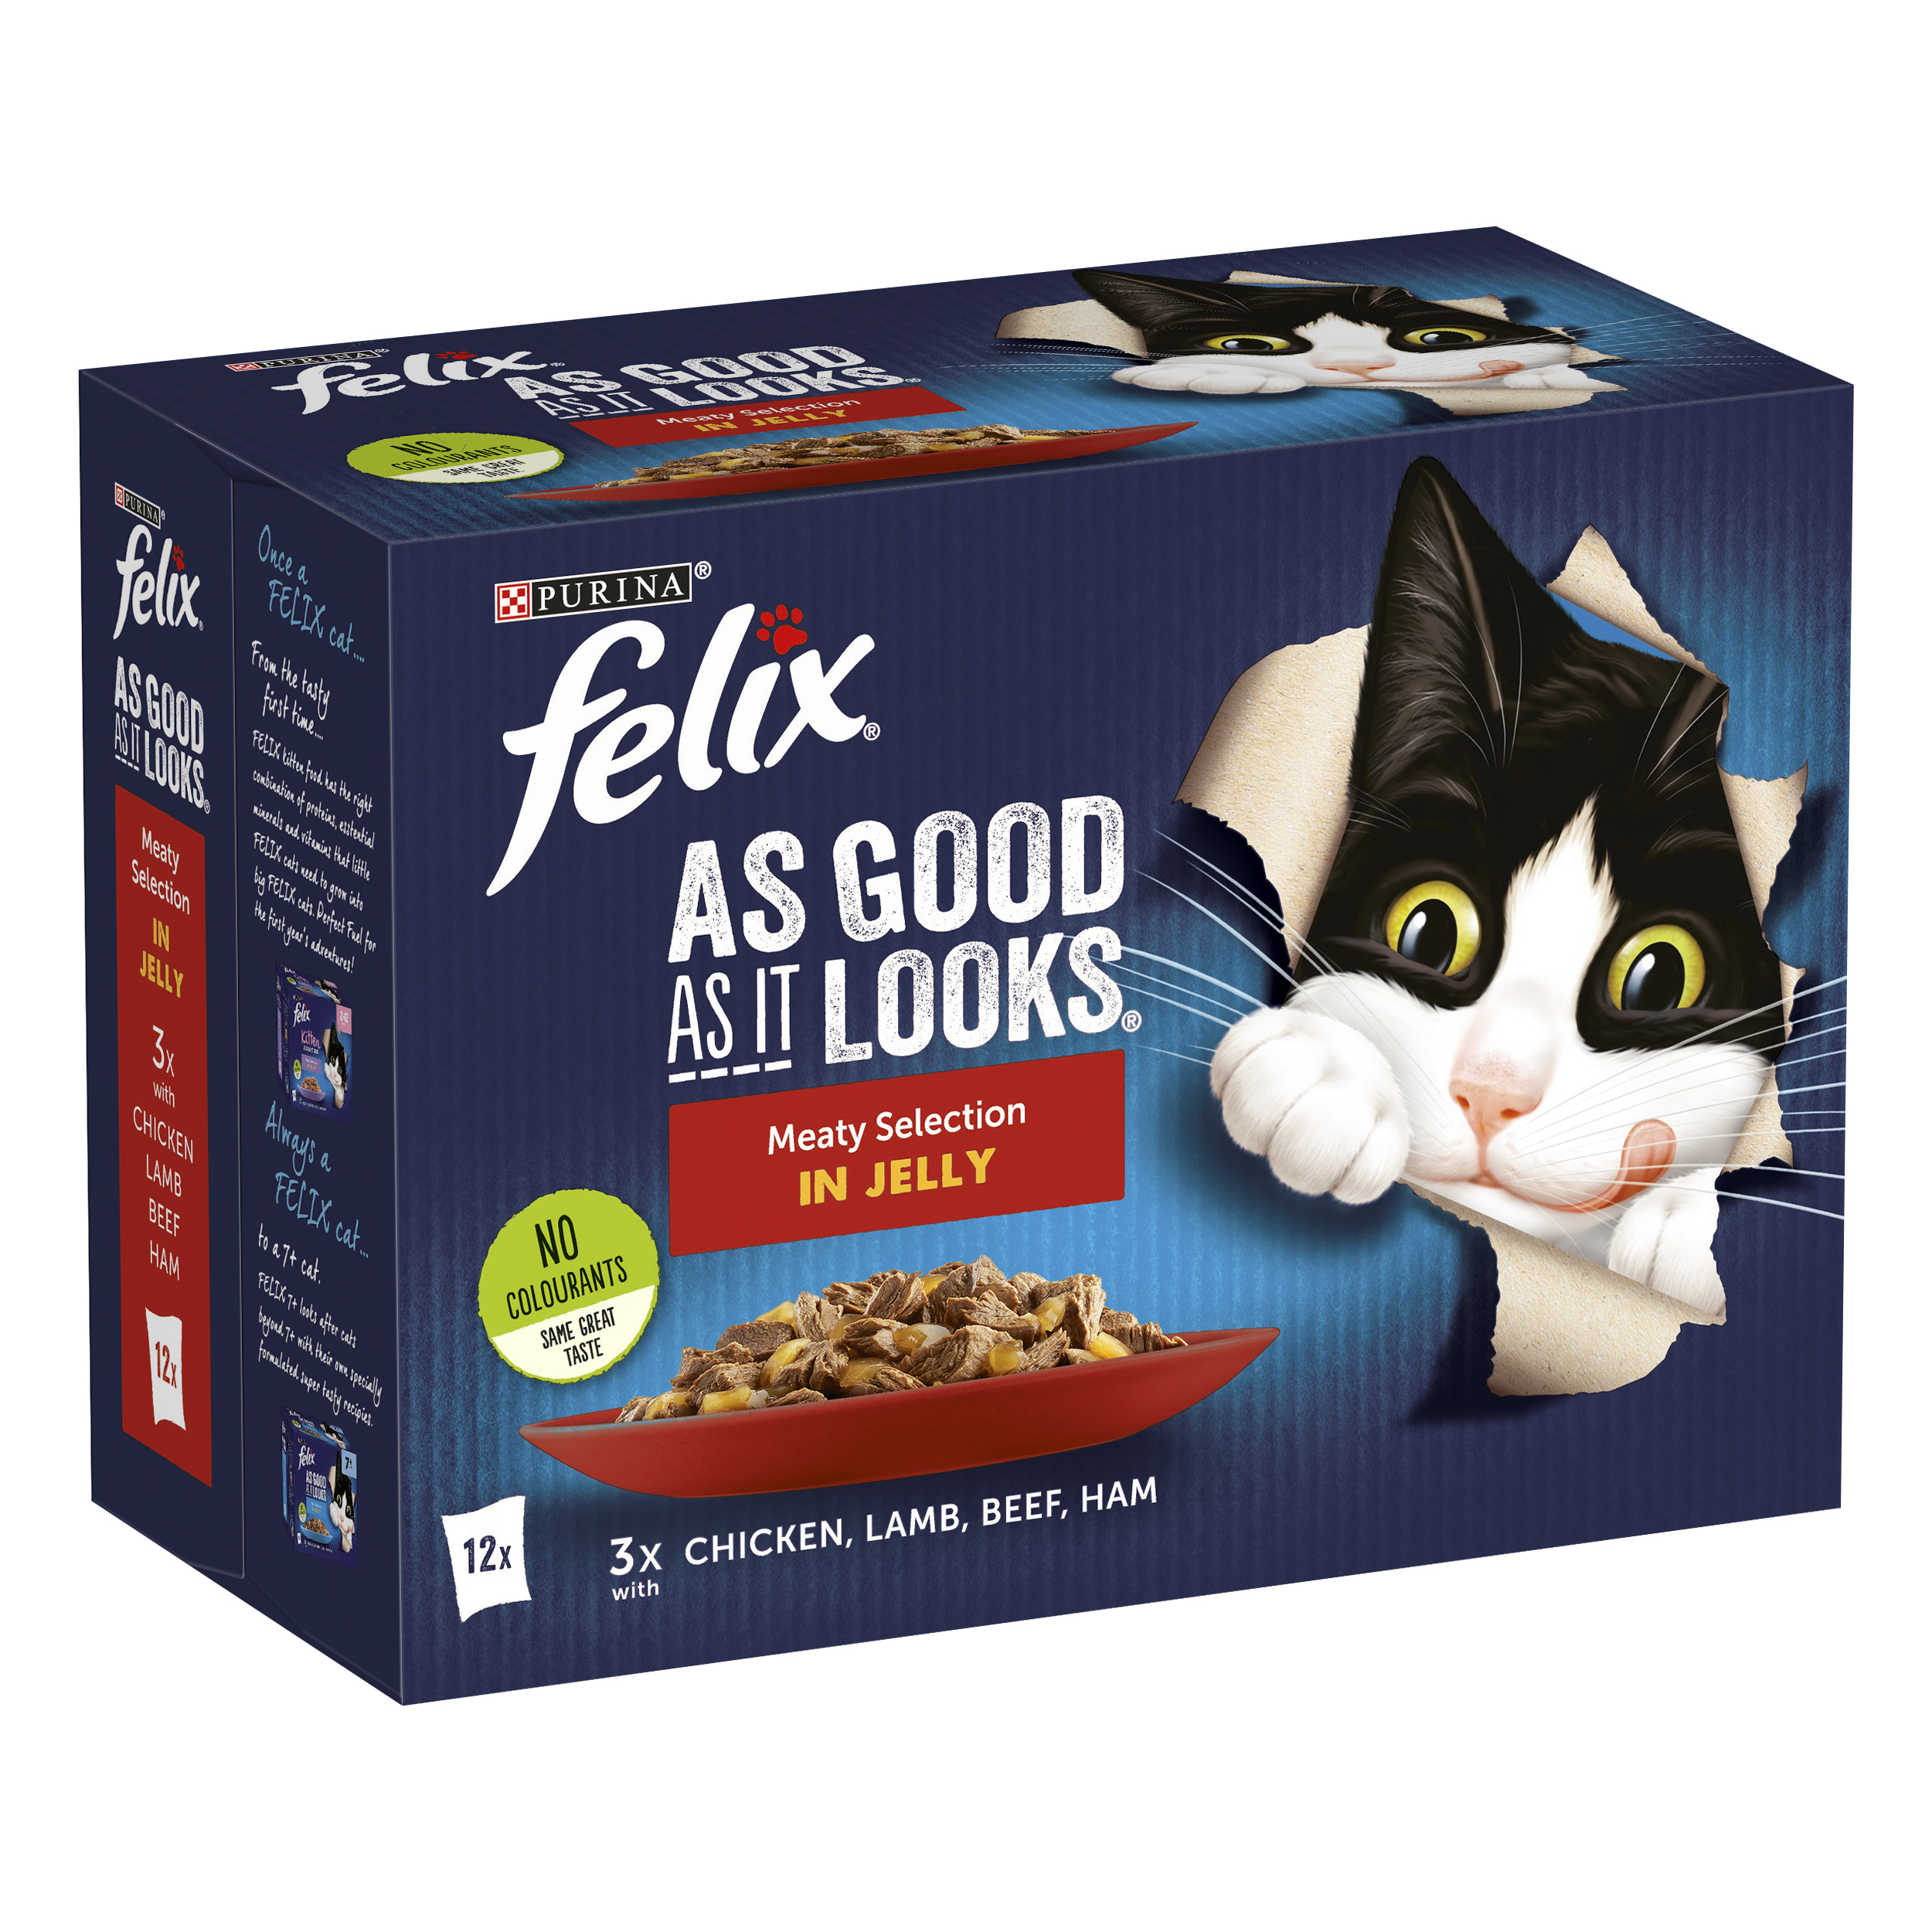 Purina Felix® As Good As It Looks Multipack Meaty Selection in Jelly 100g, Pack of 12